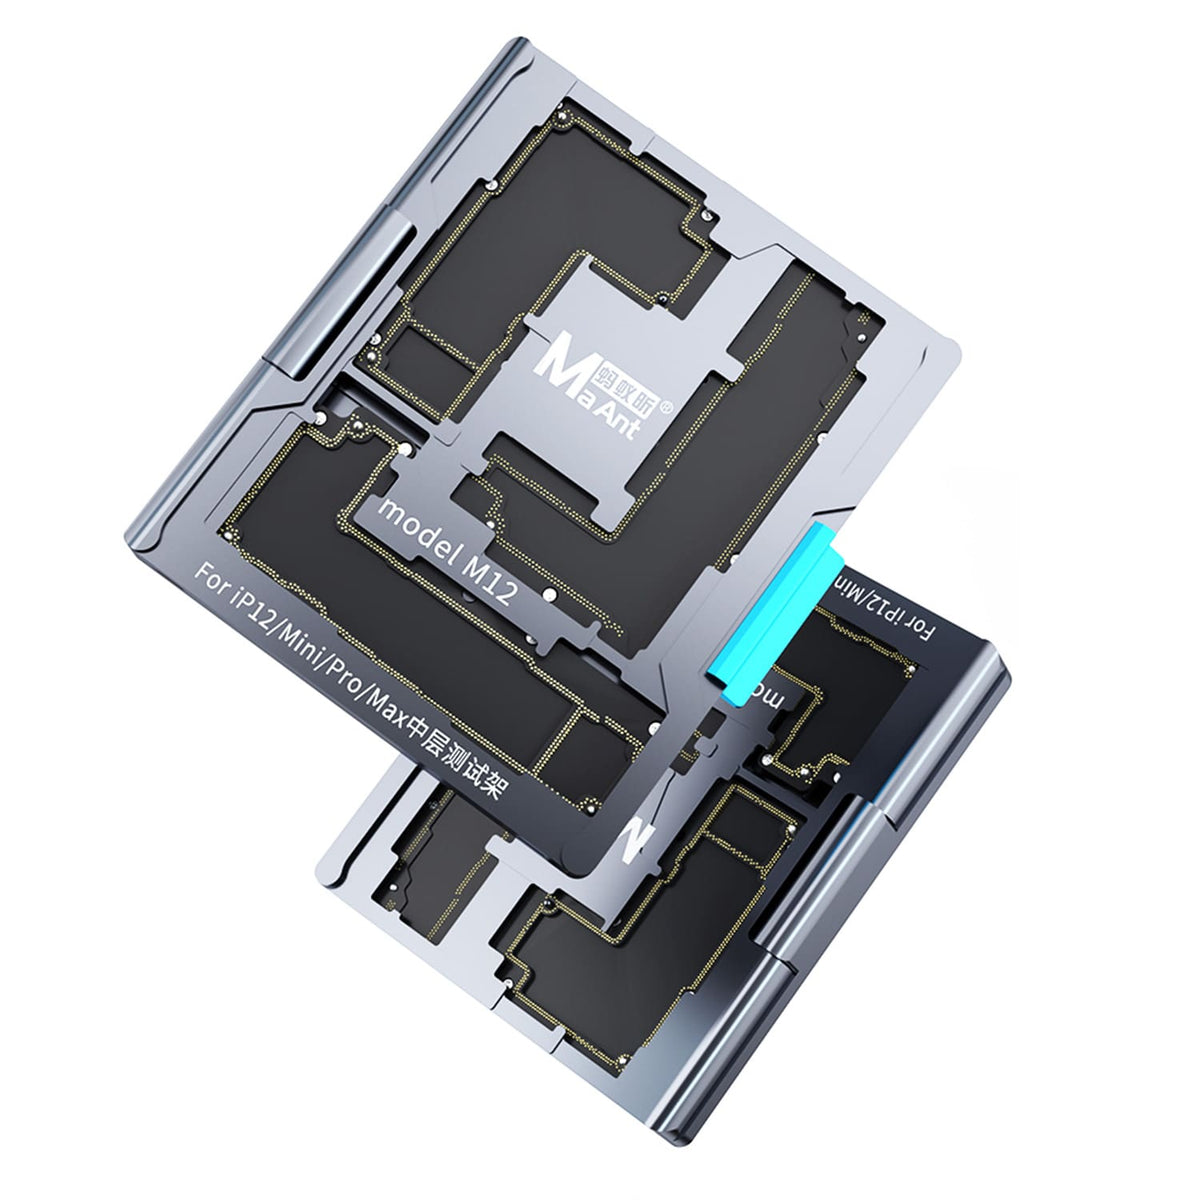 MAANT MOTHERBOARD LAYERED TEST FIXTURE FOR IPHONE X-12PROMAX